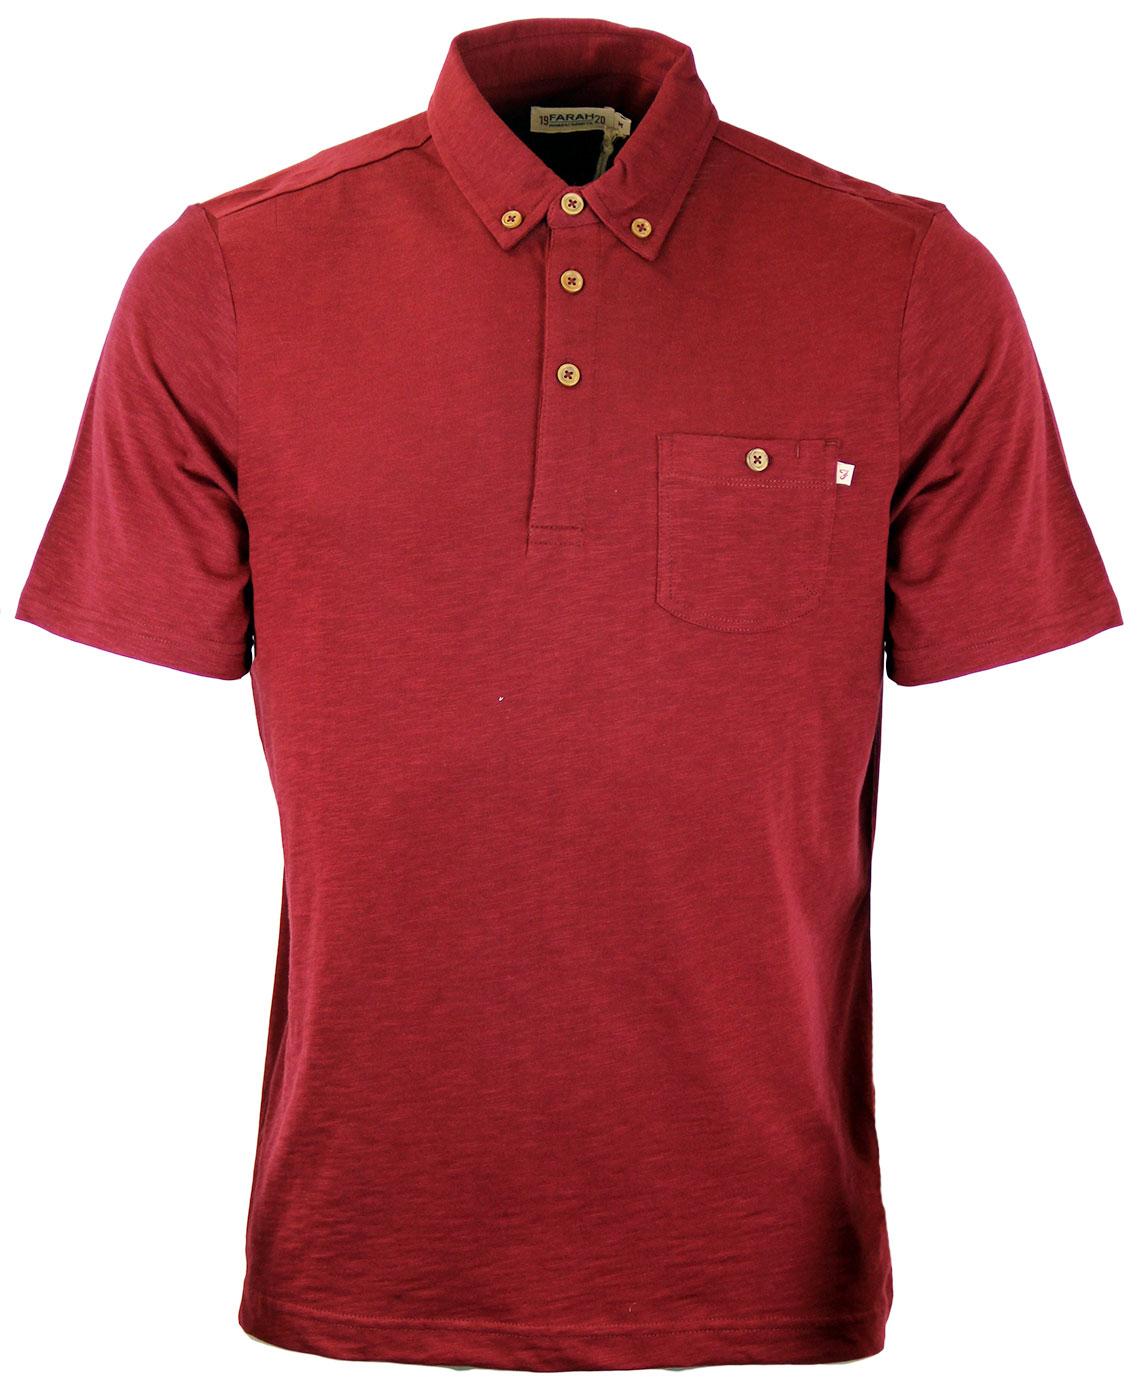 Stapelford FARAH 1920 Mod S/S Textured Polo Top DR